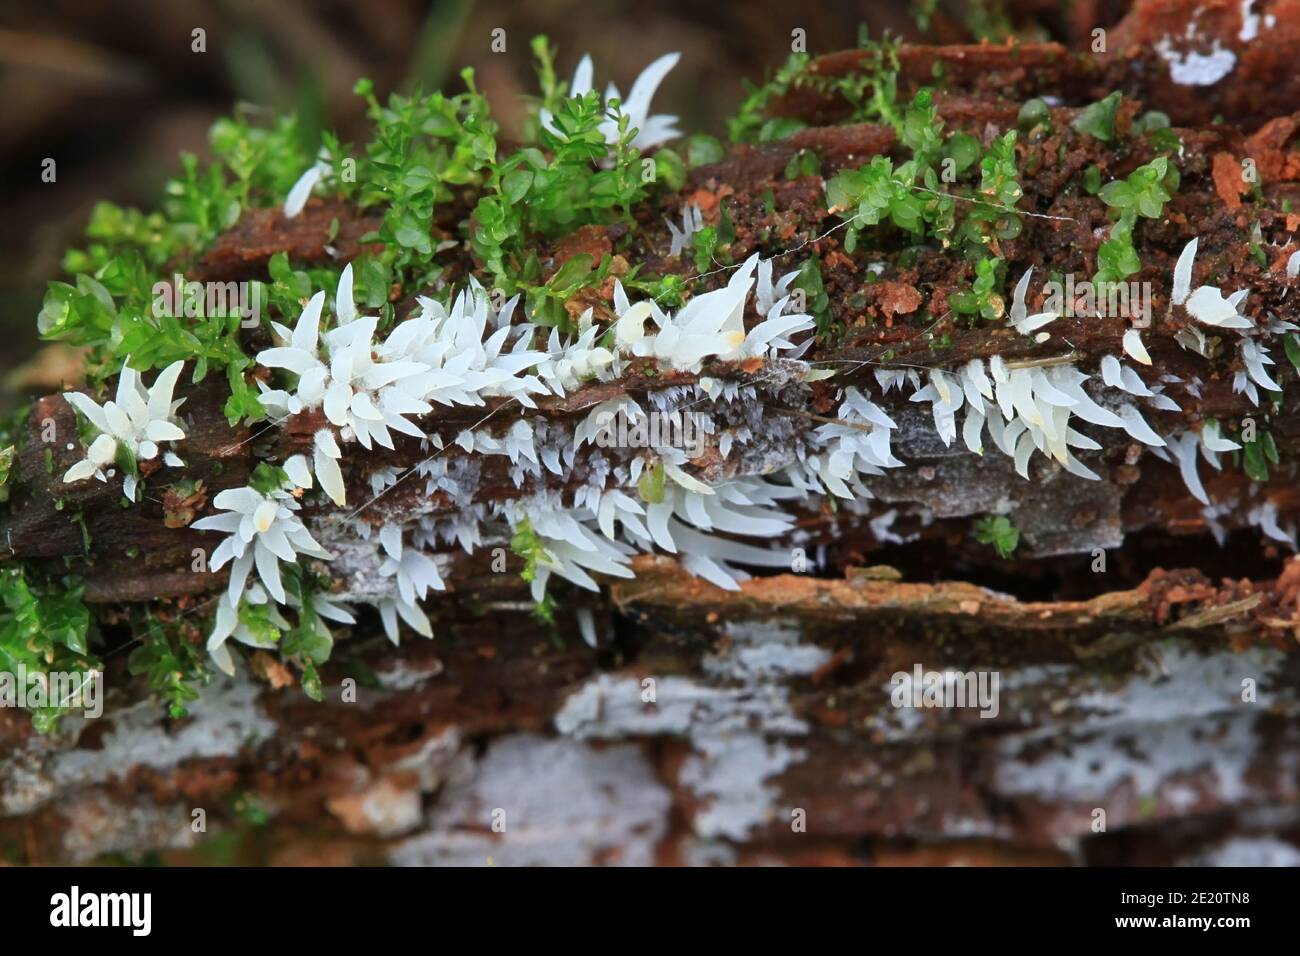 Mucronella bresadolae, known as the Icicle fungus, wild mushroom from Finland Stock Photo